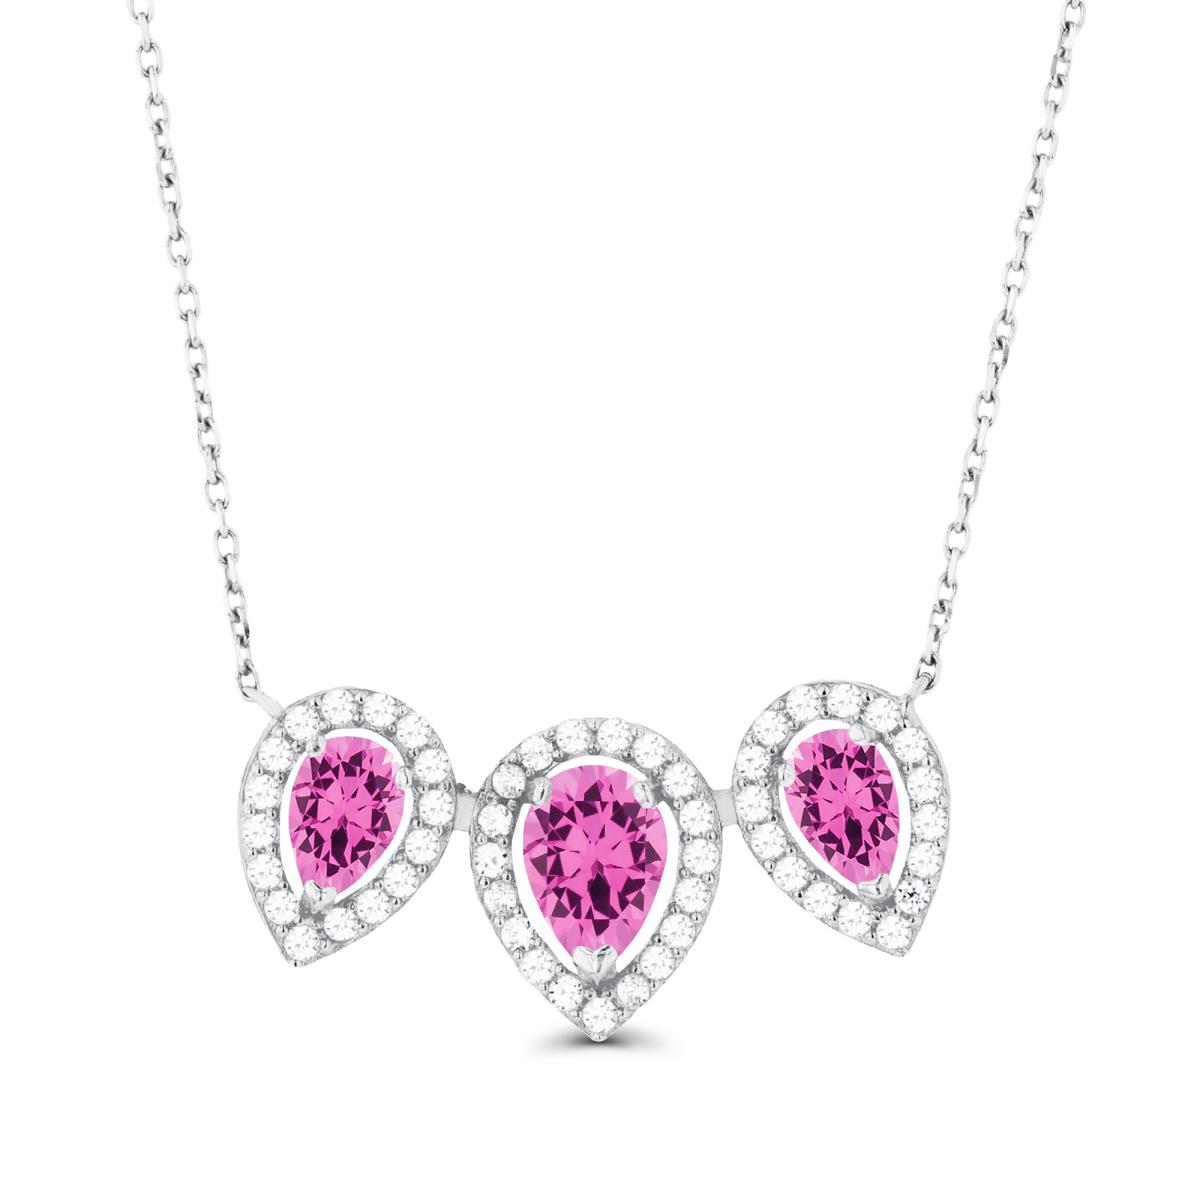 14K White Gold Triple Pear Created Pink Sapphire & Created White Sapphire Halo 18"Necklace